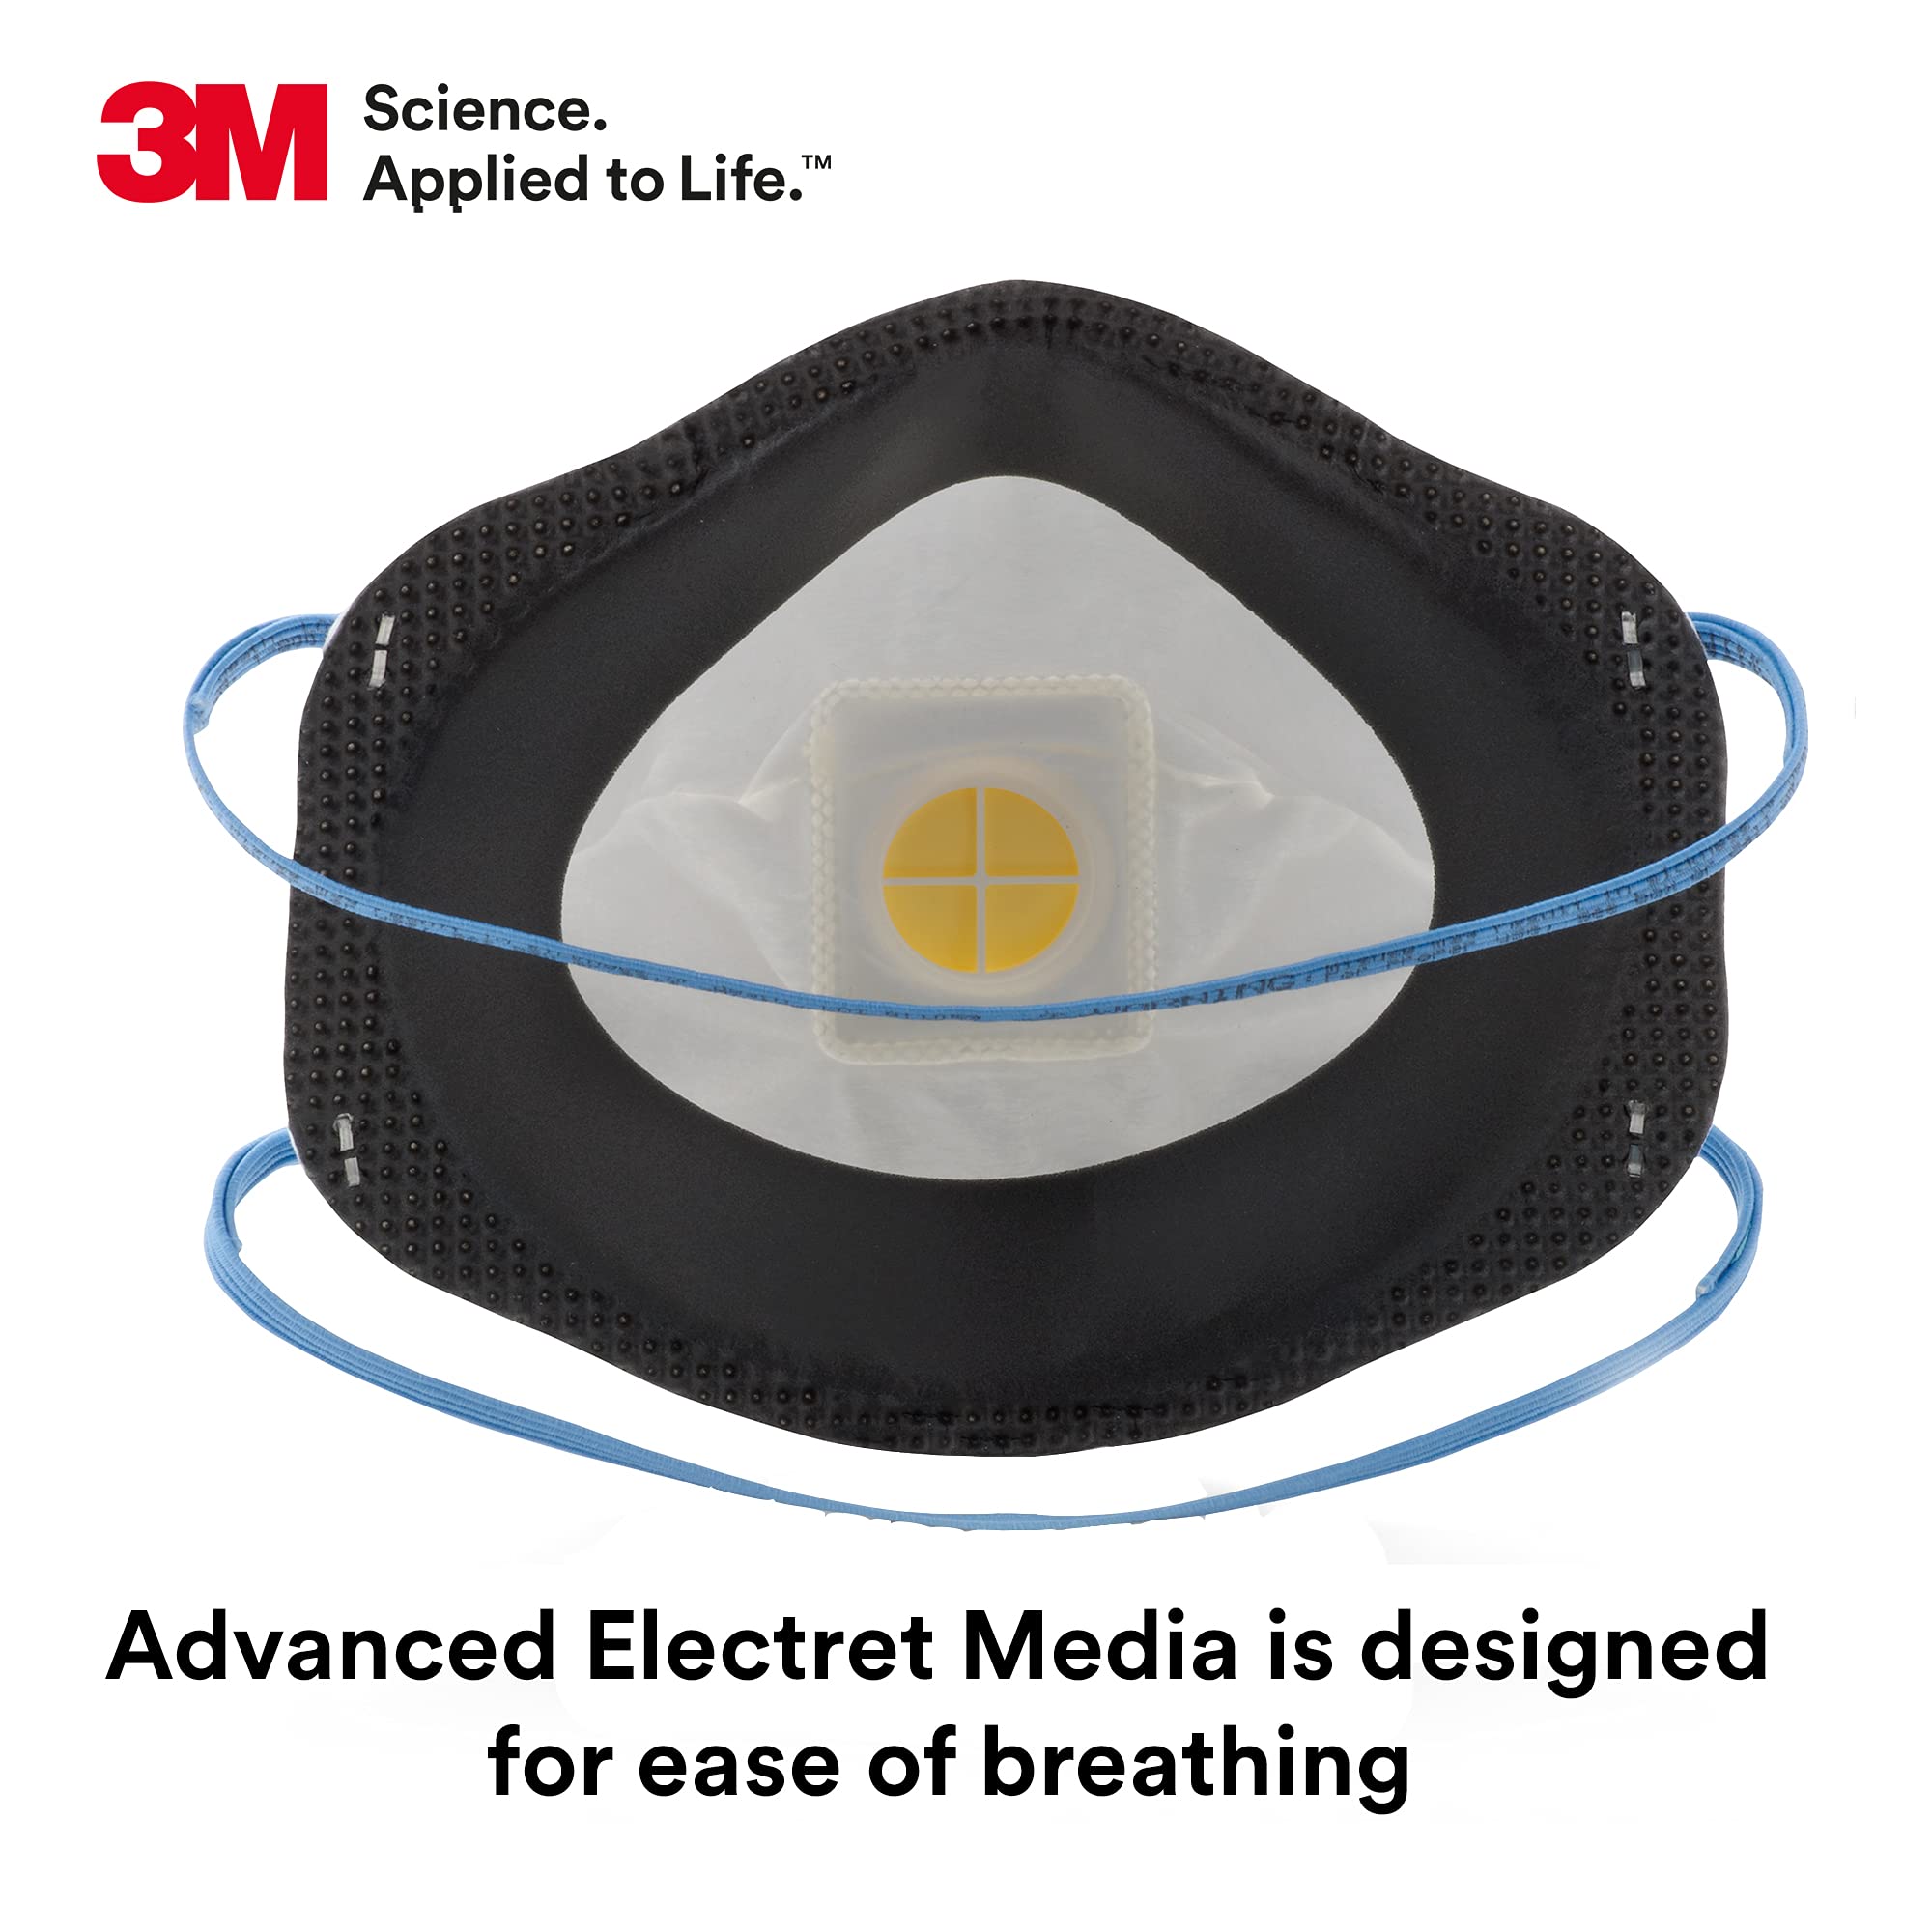 3M Particulate Respirator 8271, P95, Pack of 10, Cool Flow Exhalation Valve, Braided Headband, Adjustable M-noseclip, Disposable General Purpose for Dust and other Particles